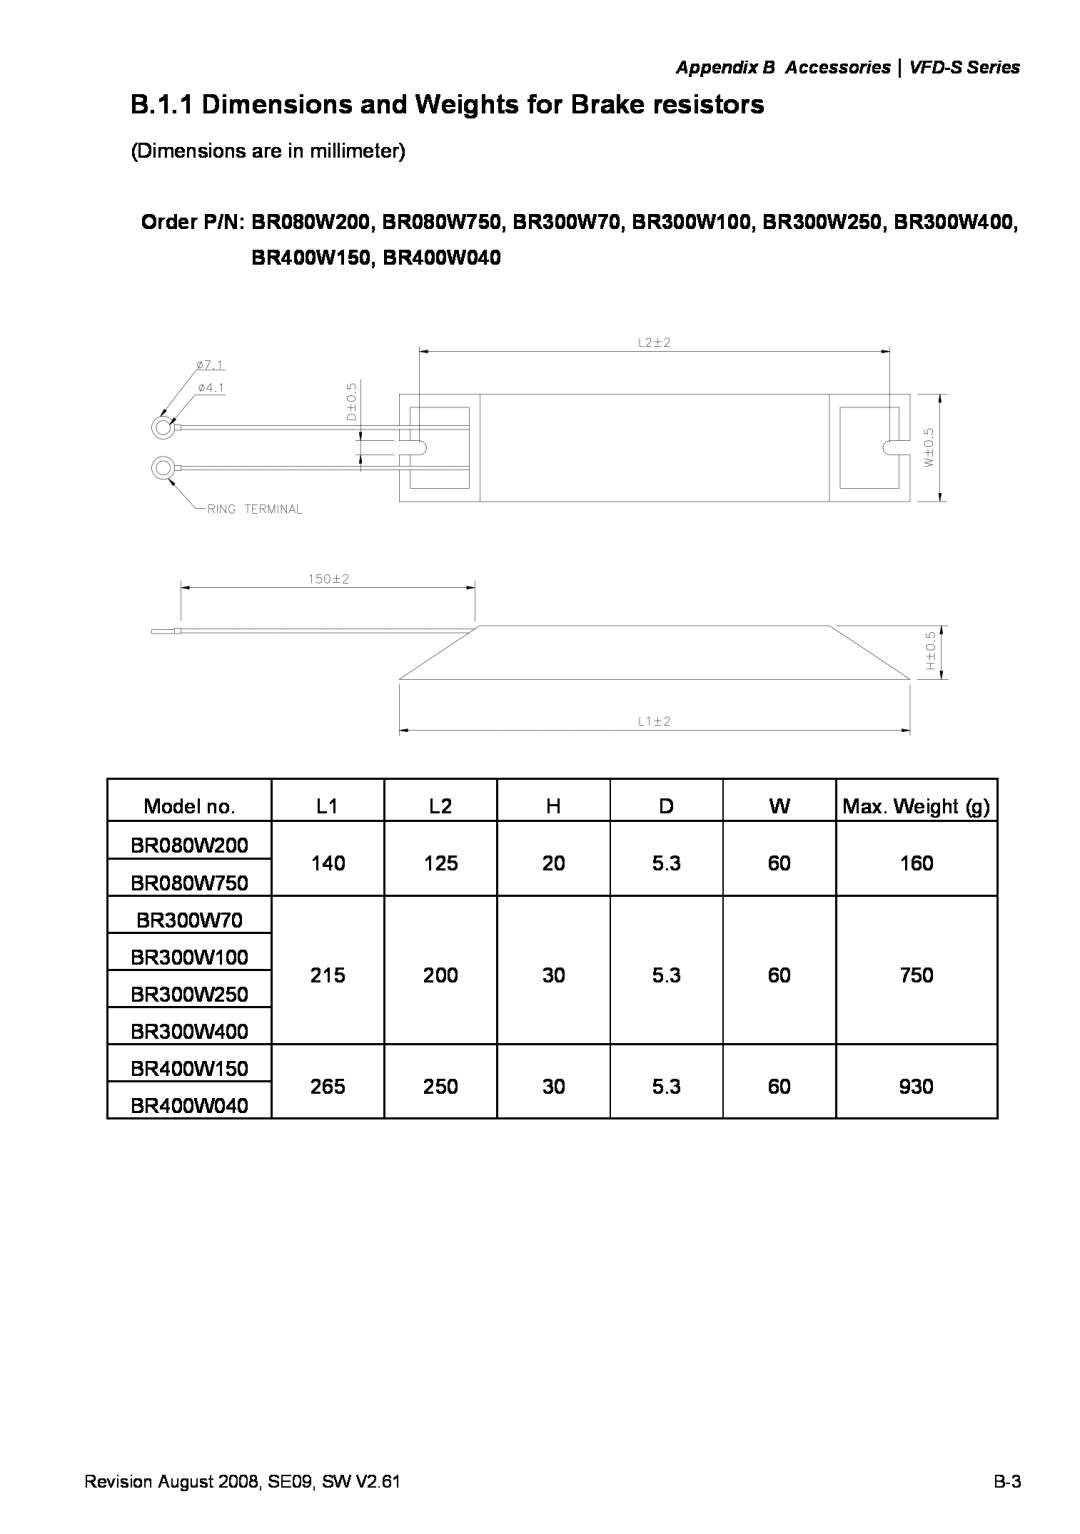 Delta Electronics VFD-S manual B.1.1 Dimensions and Weights for Brake resistors 